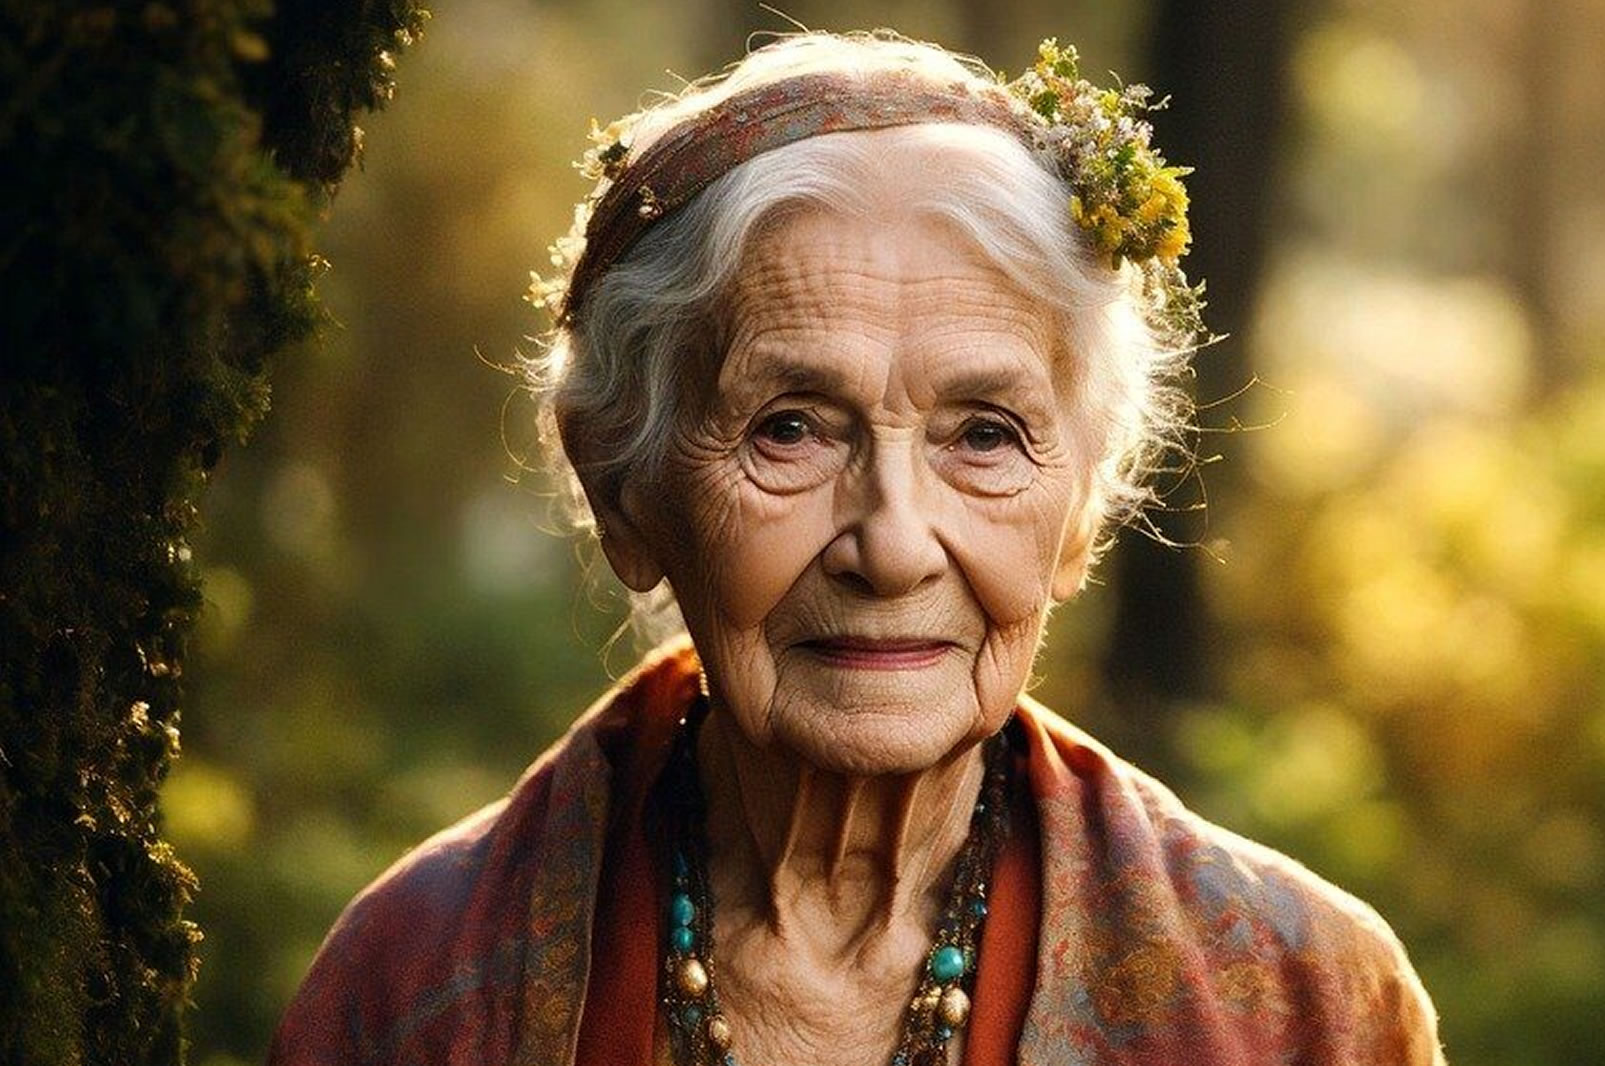 Older, stylish woman embracing her age